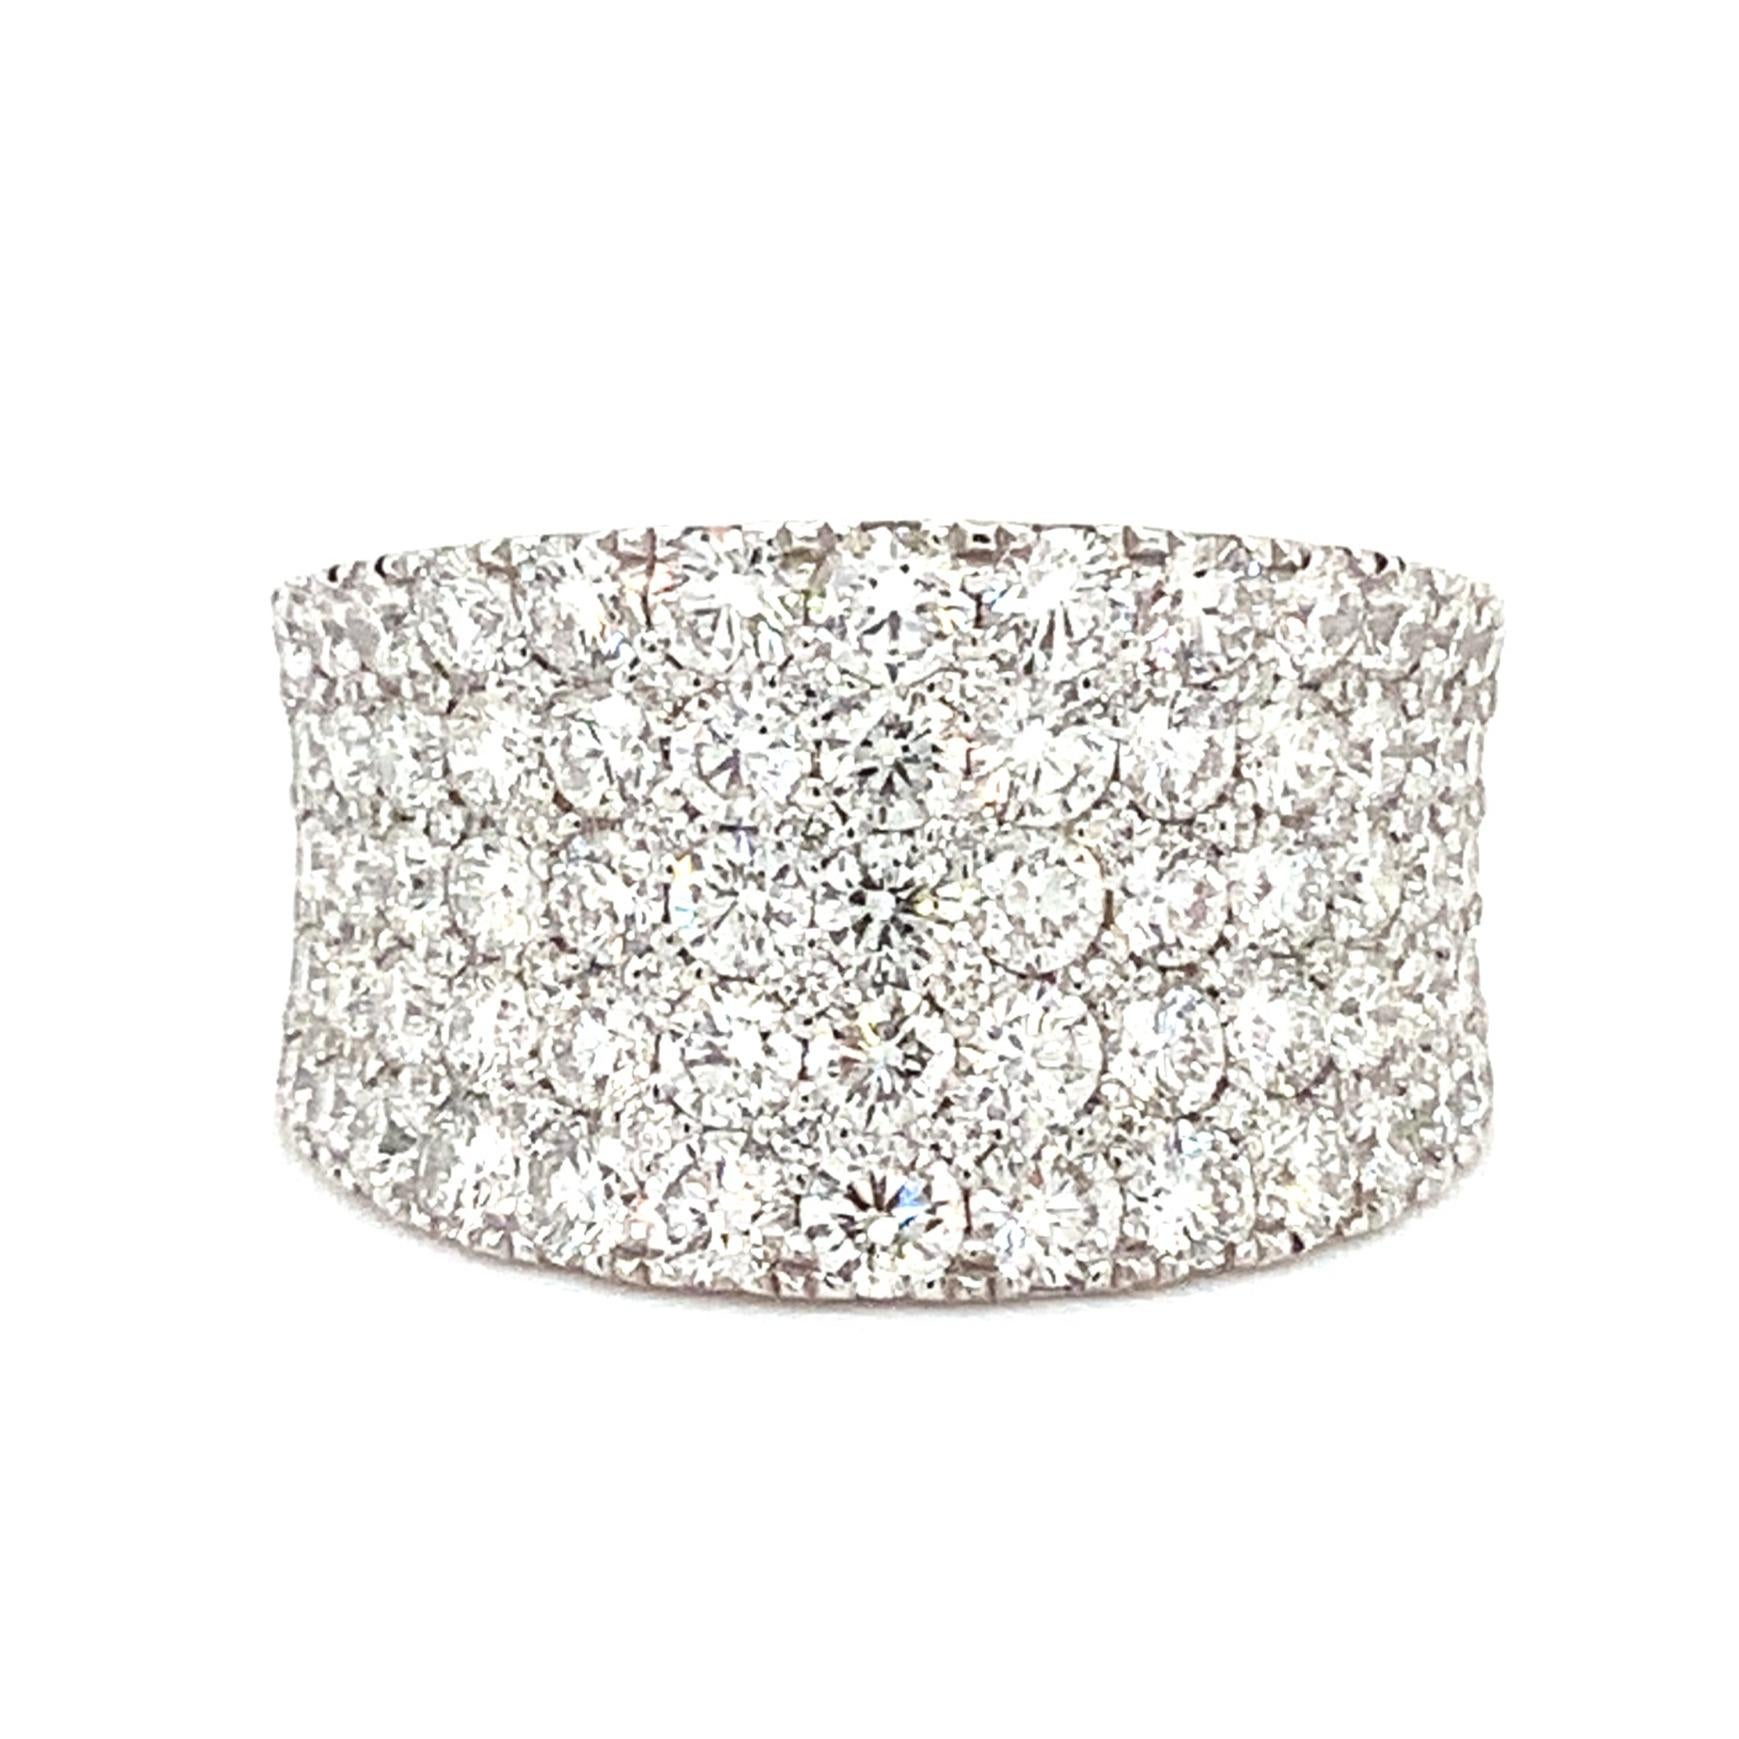 This Spectacular Afarin Collection band consists of five rows of concave pavé diamonds meticulously placed in 18Kt white gold, boasting a combined weight of 2.71 carats. The precision cutting of each stone enhances its clarity and luminosity,